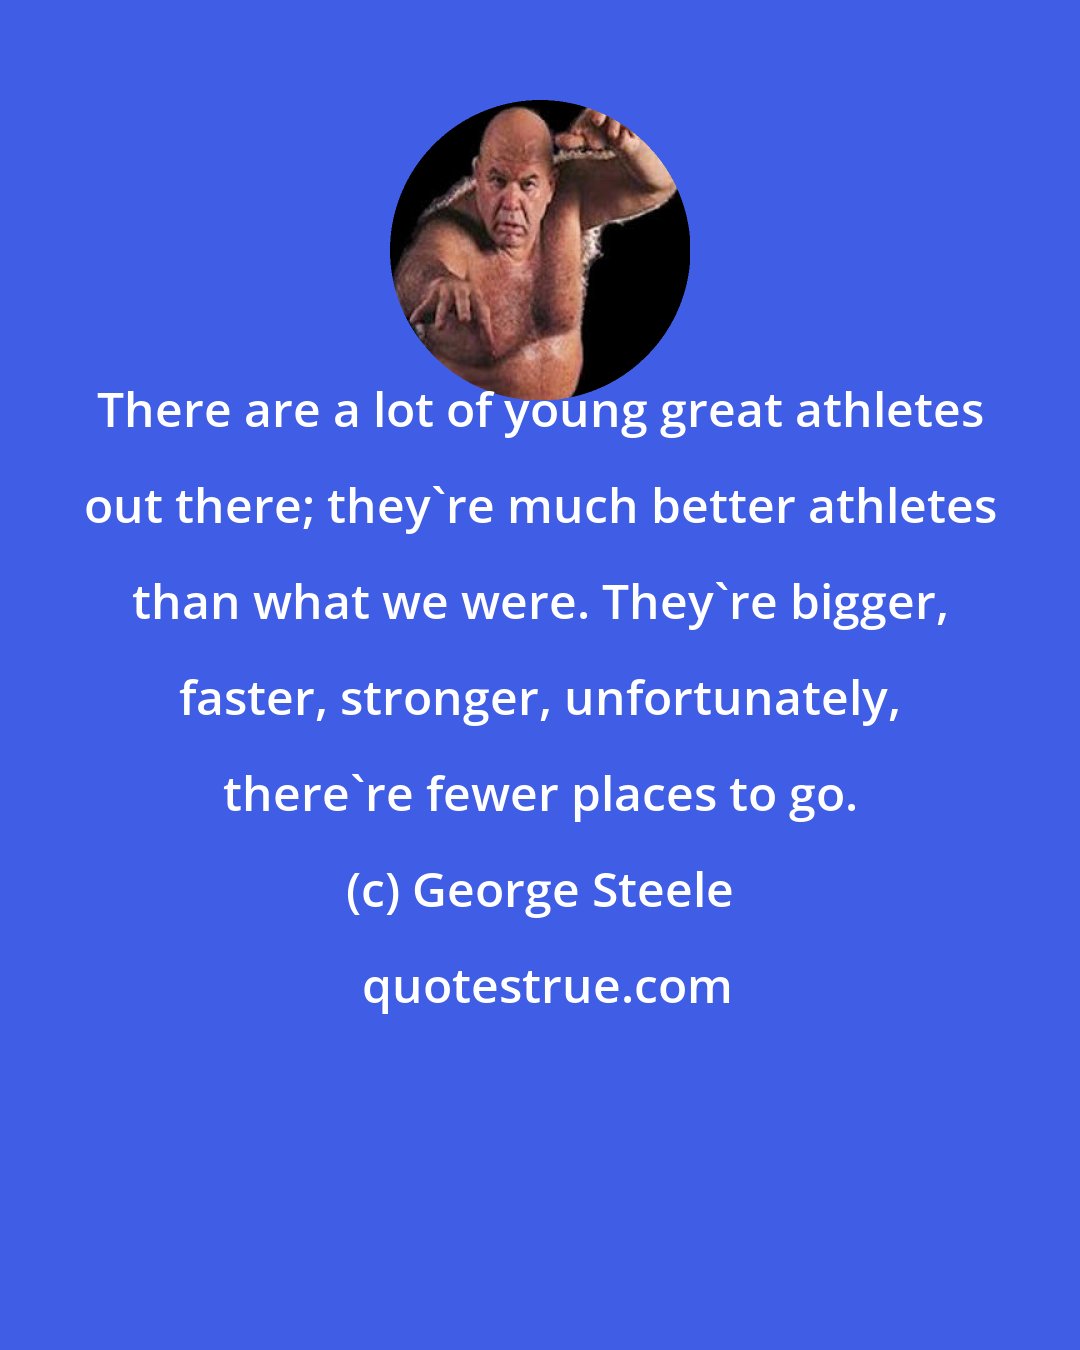 George Steele: There are a lot of young great athletes out there; they're much better athletes than what we were. They're bigger, faster, stronger, unfortunately, there're fewer places to go.